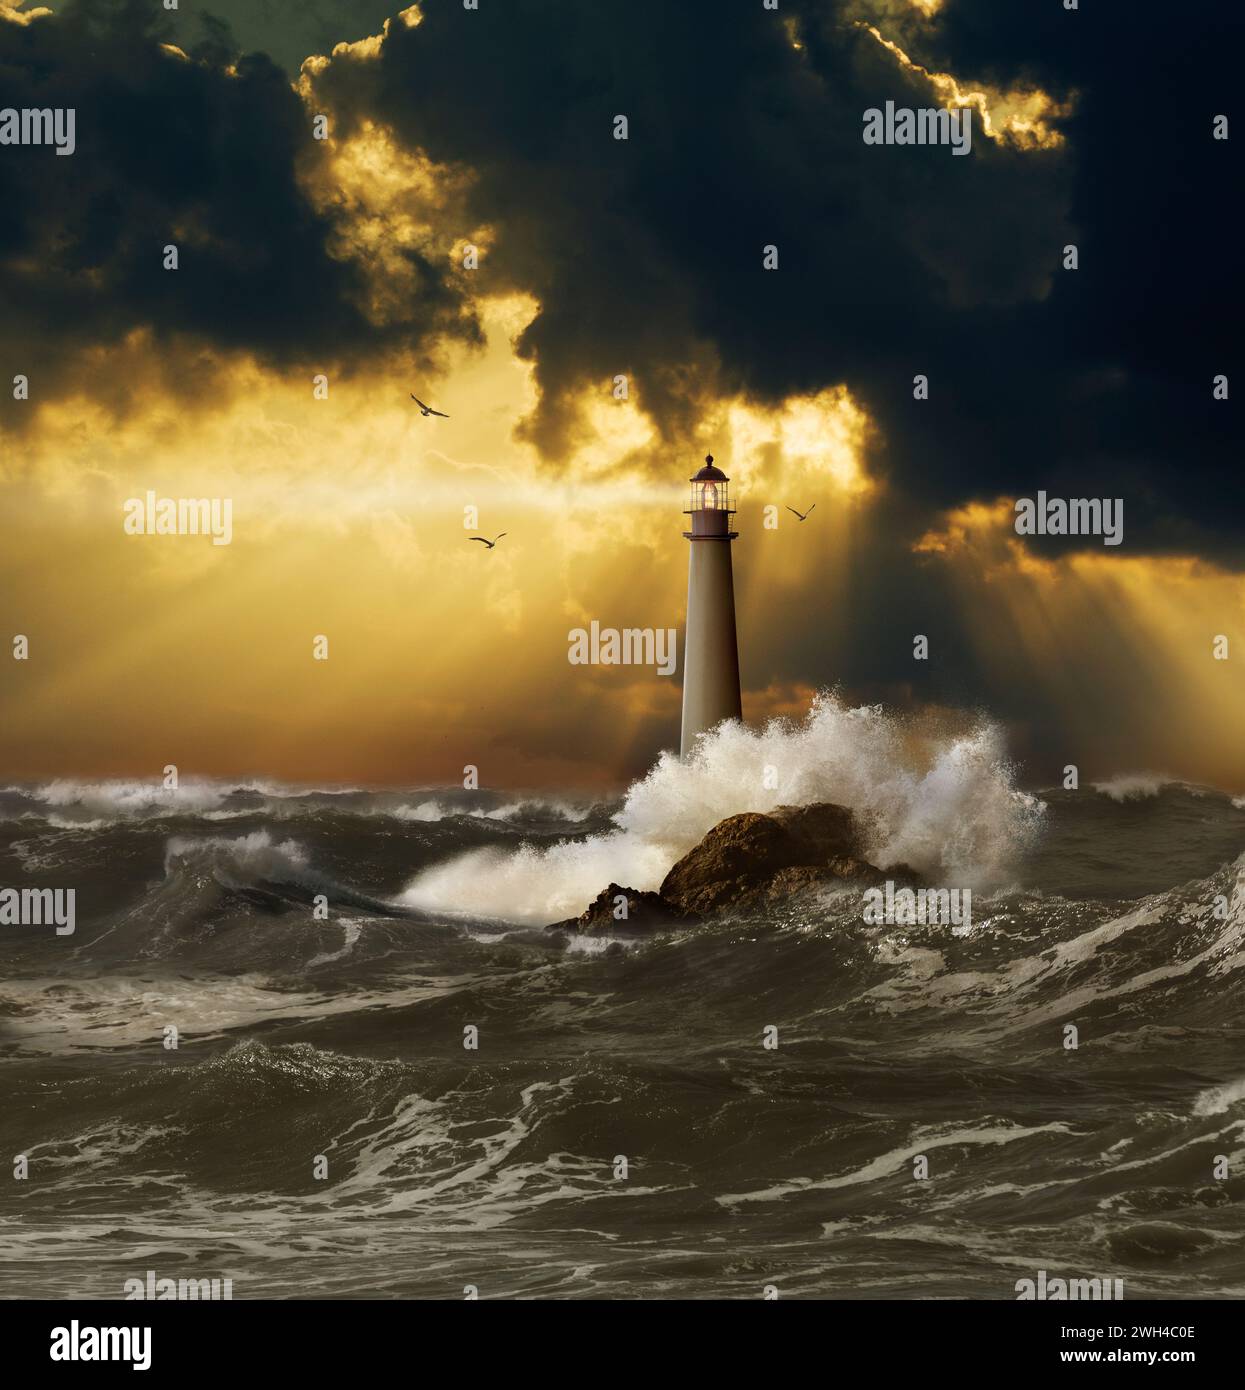 A beautiful lighthouse casts its guiding beam over storm-tossed seas under God-ray storm clouds in an image of safety, guidance, and security. Stock Photo